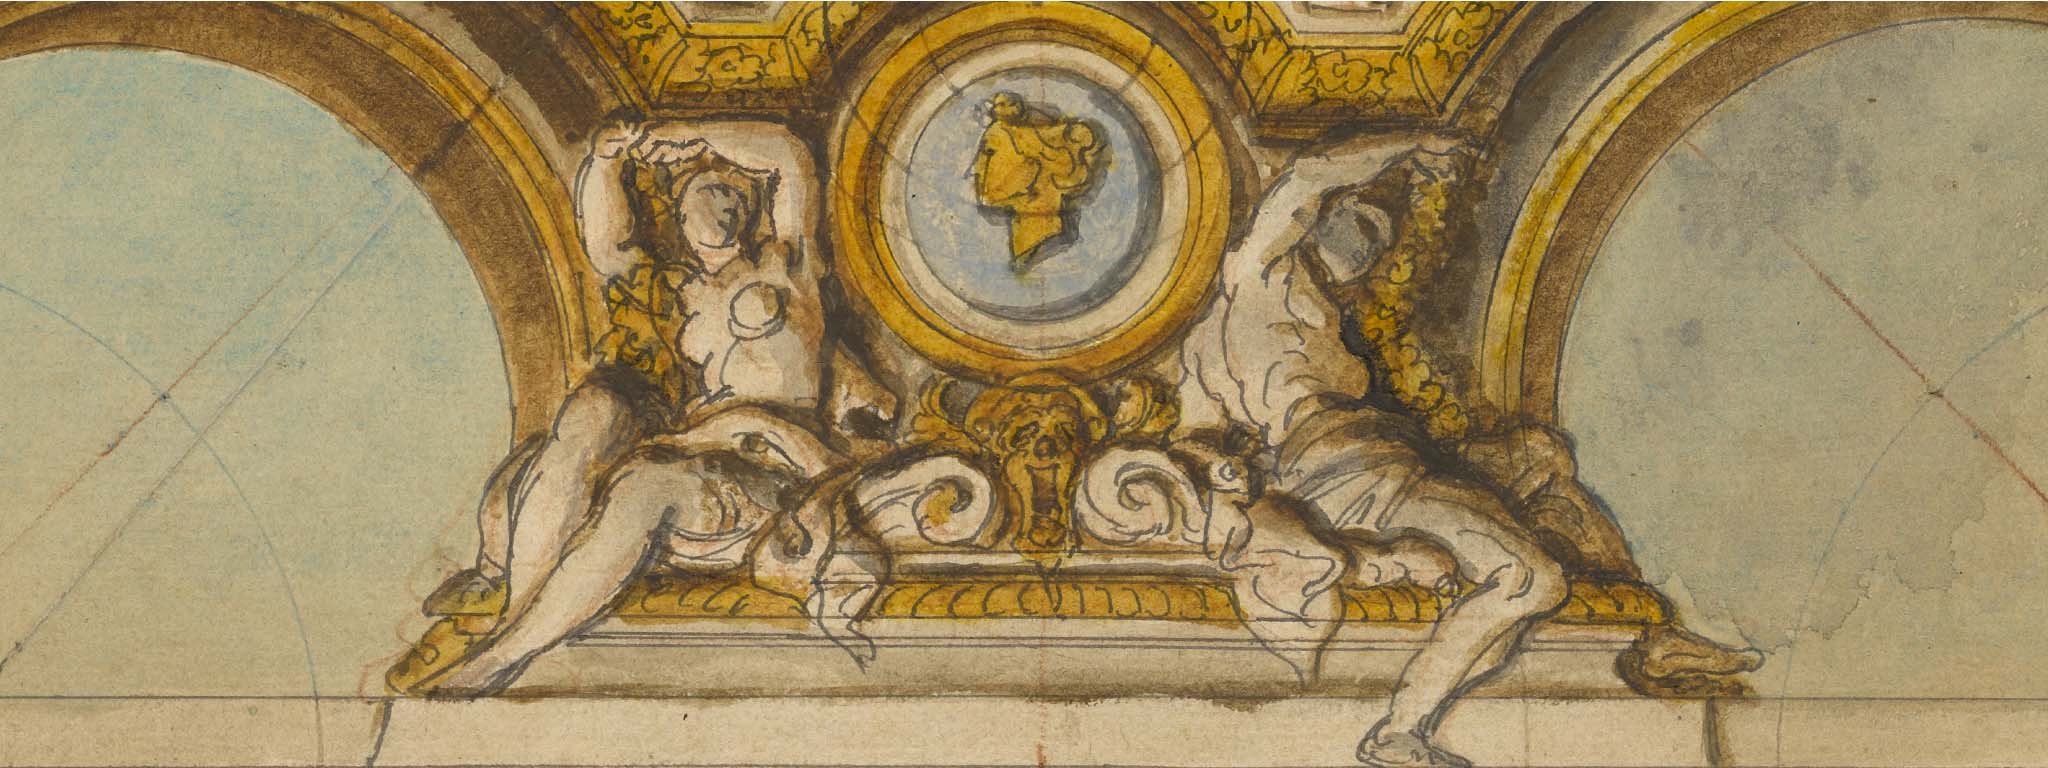 Studies for a Ceiling Decoration with the Apotheosis of Psyche  (detail), about 1680, Charles de la Fosse, Pen and black ink and brush and watercolor over red chalk on paper. Getty Museum